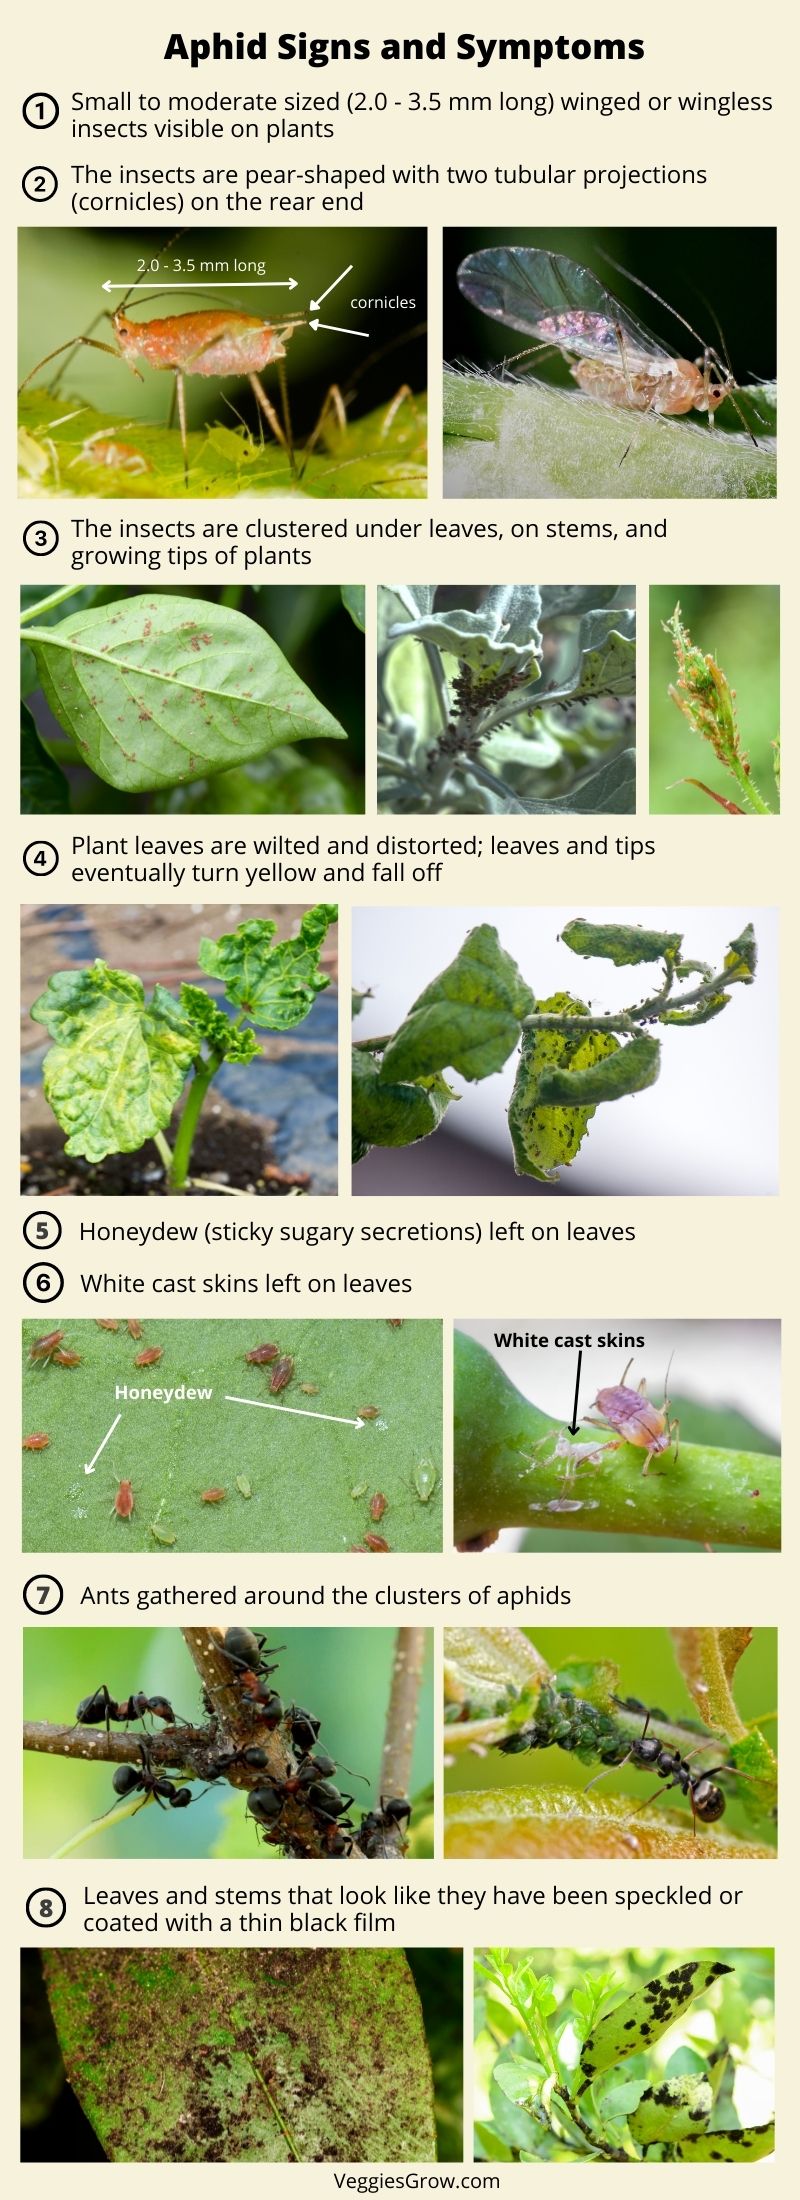 Aphid Signs and Symptoms Blog Graphic